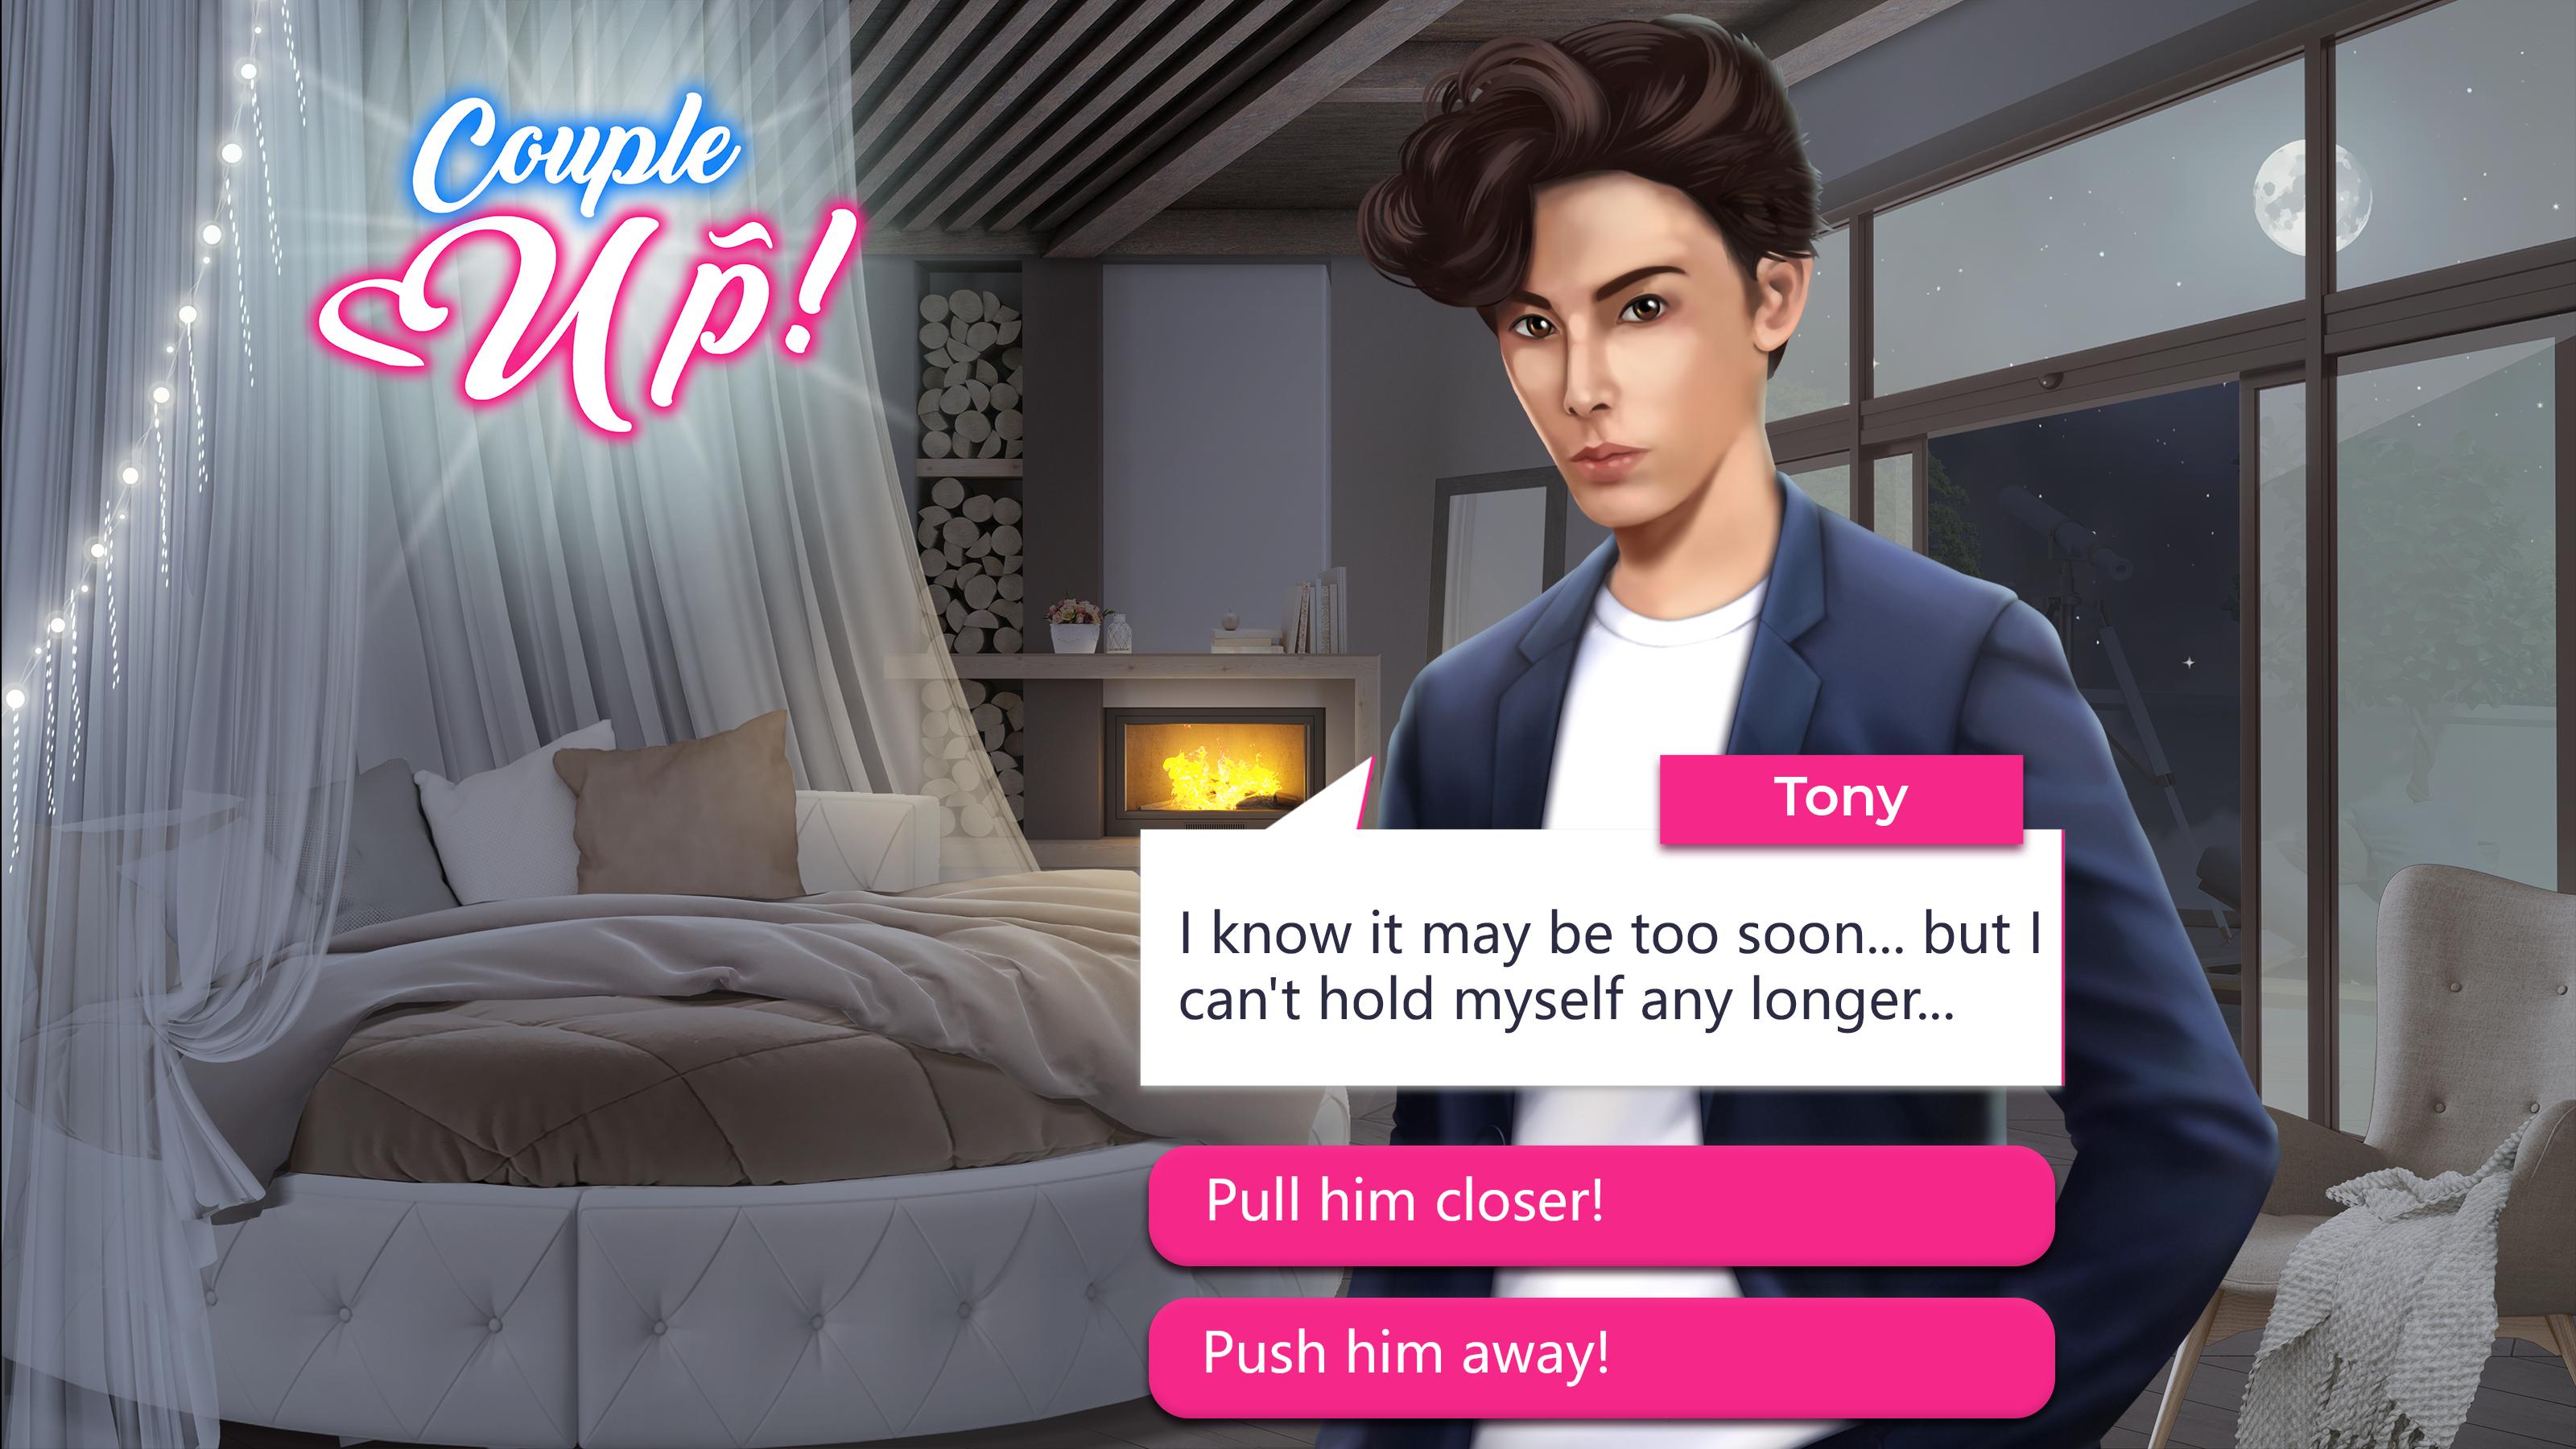 Couple Up! Love Show - Interactive Story 0.7.5 Screenshot 6